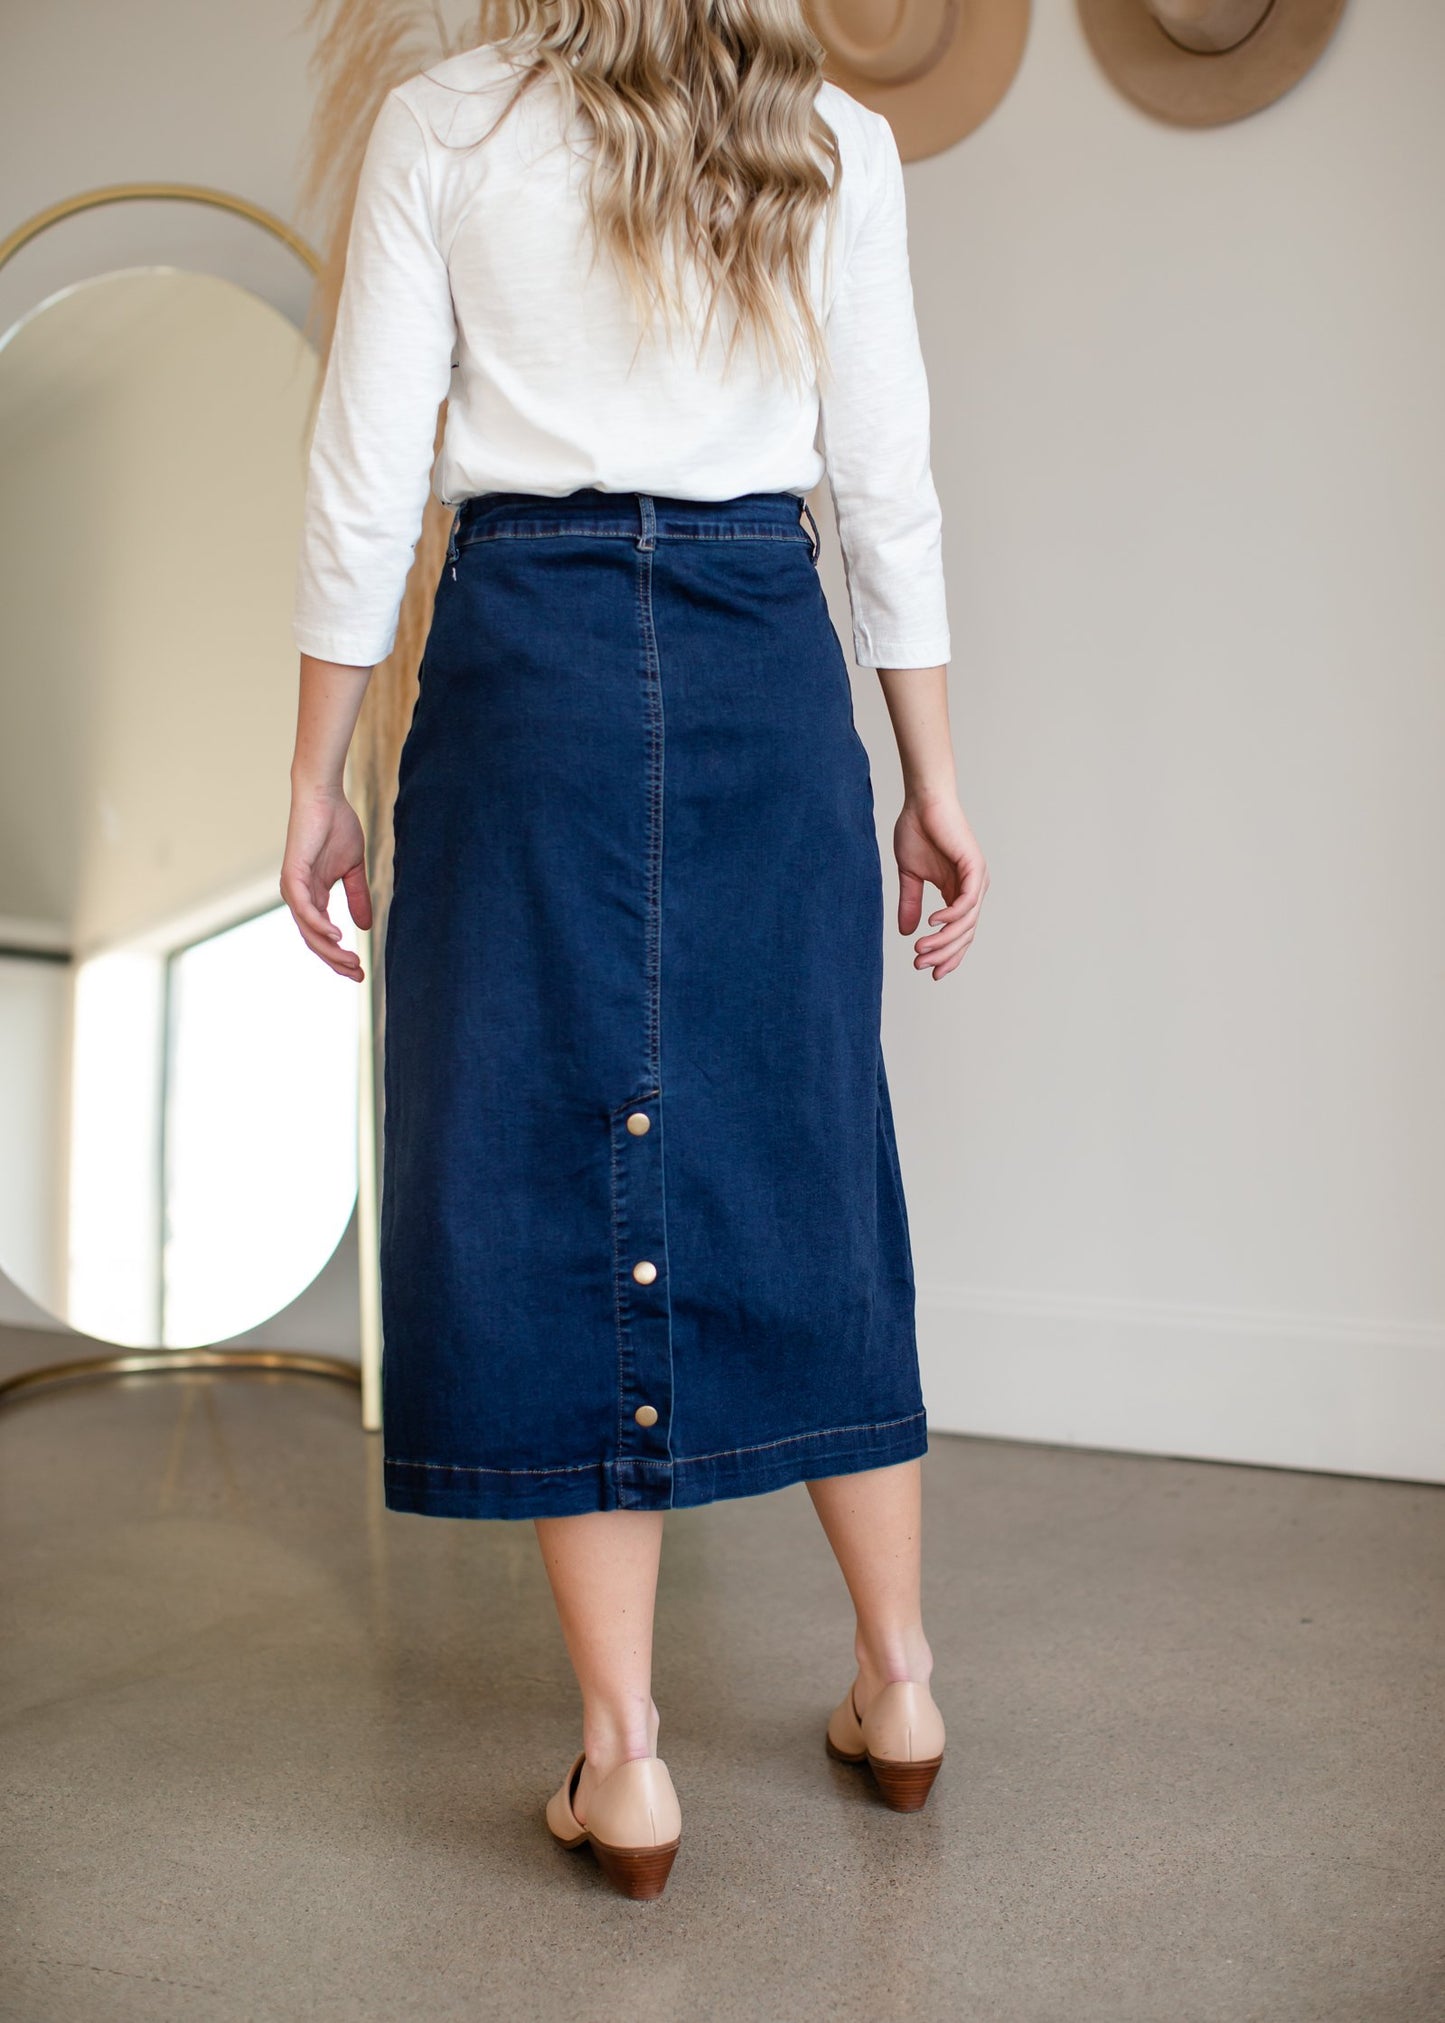 The caren skirt is an inherit design with functioning side pockets and is a slight a-line denim skirt. It has matte gold buttons on the back for added detail.